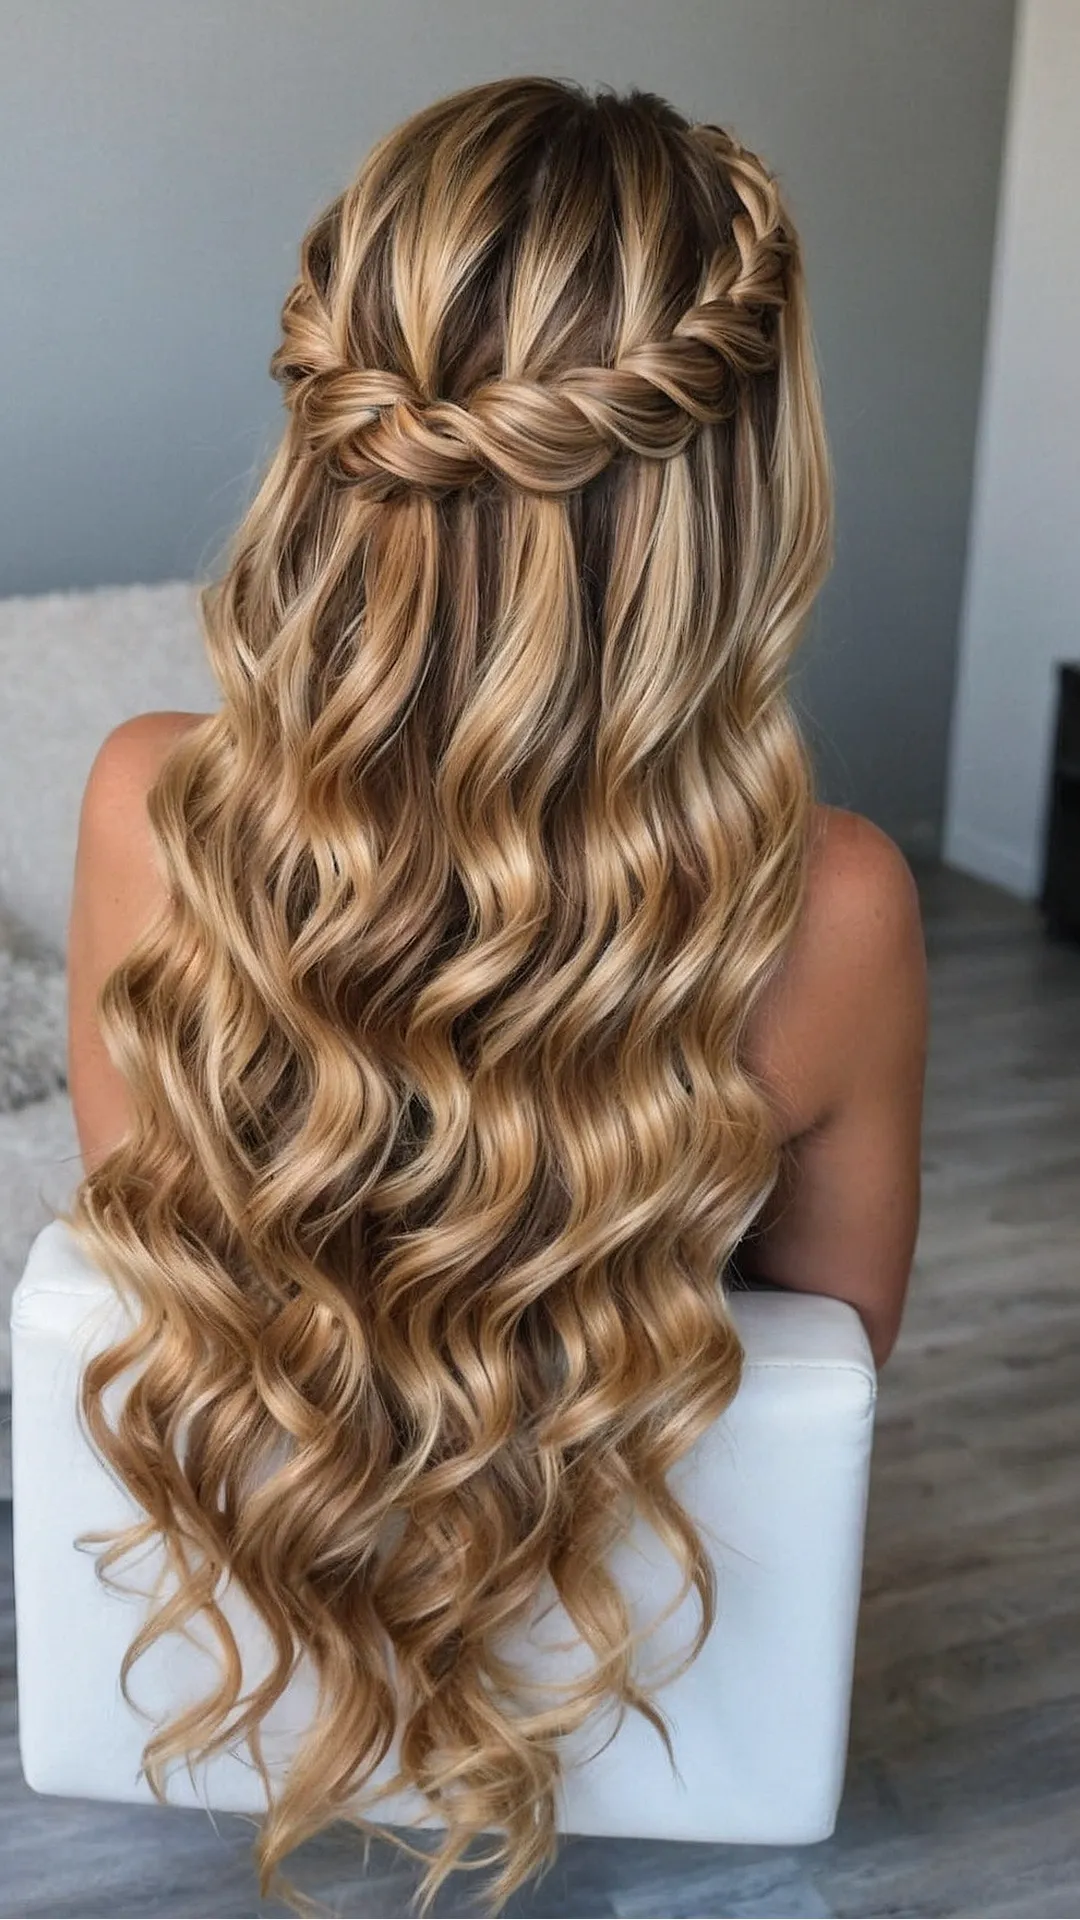 Chic Braids for Prom: Trendy Hair Ideas